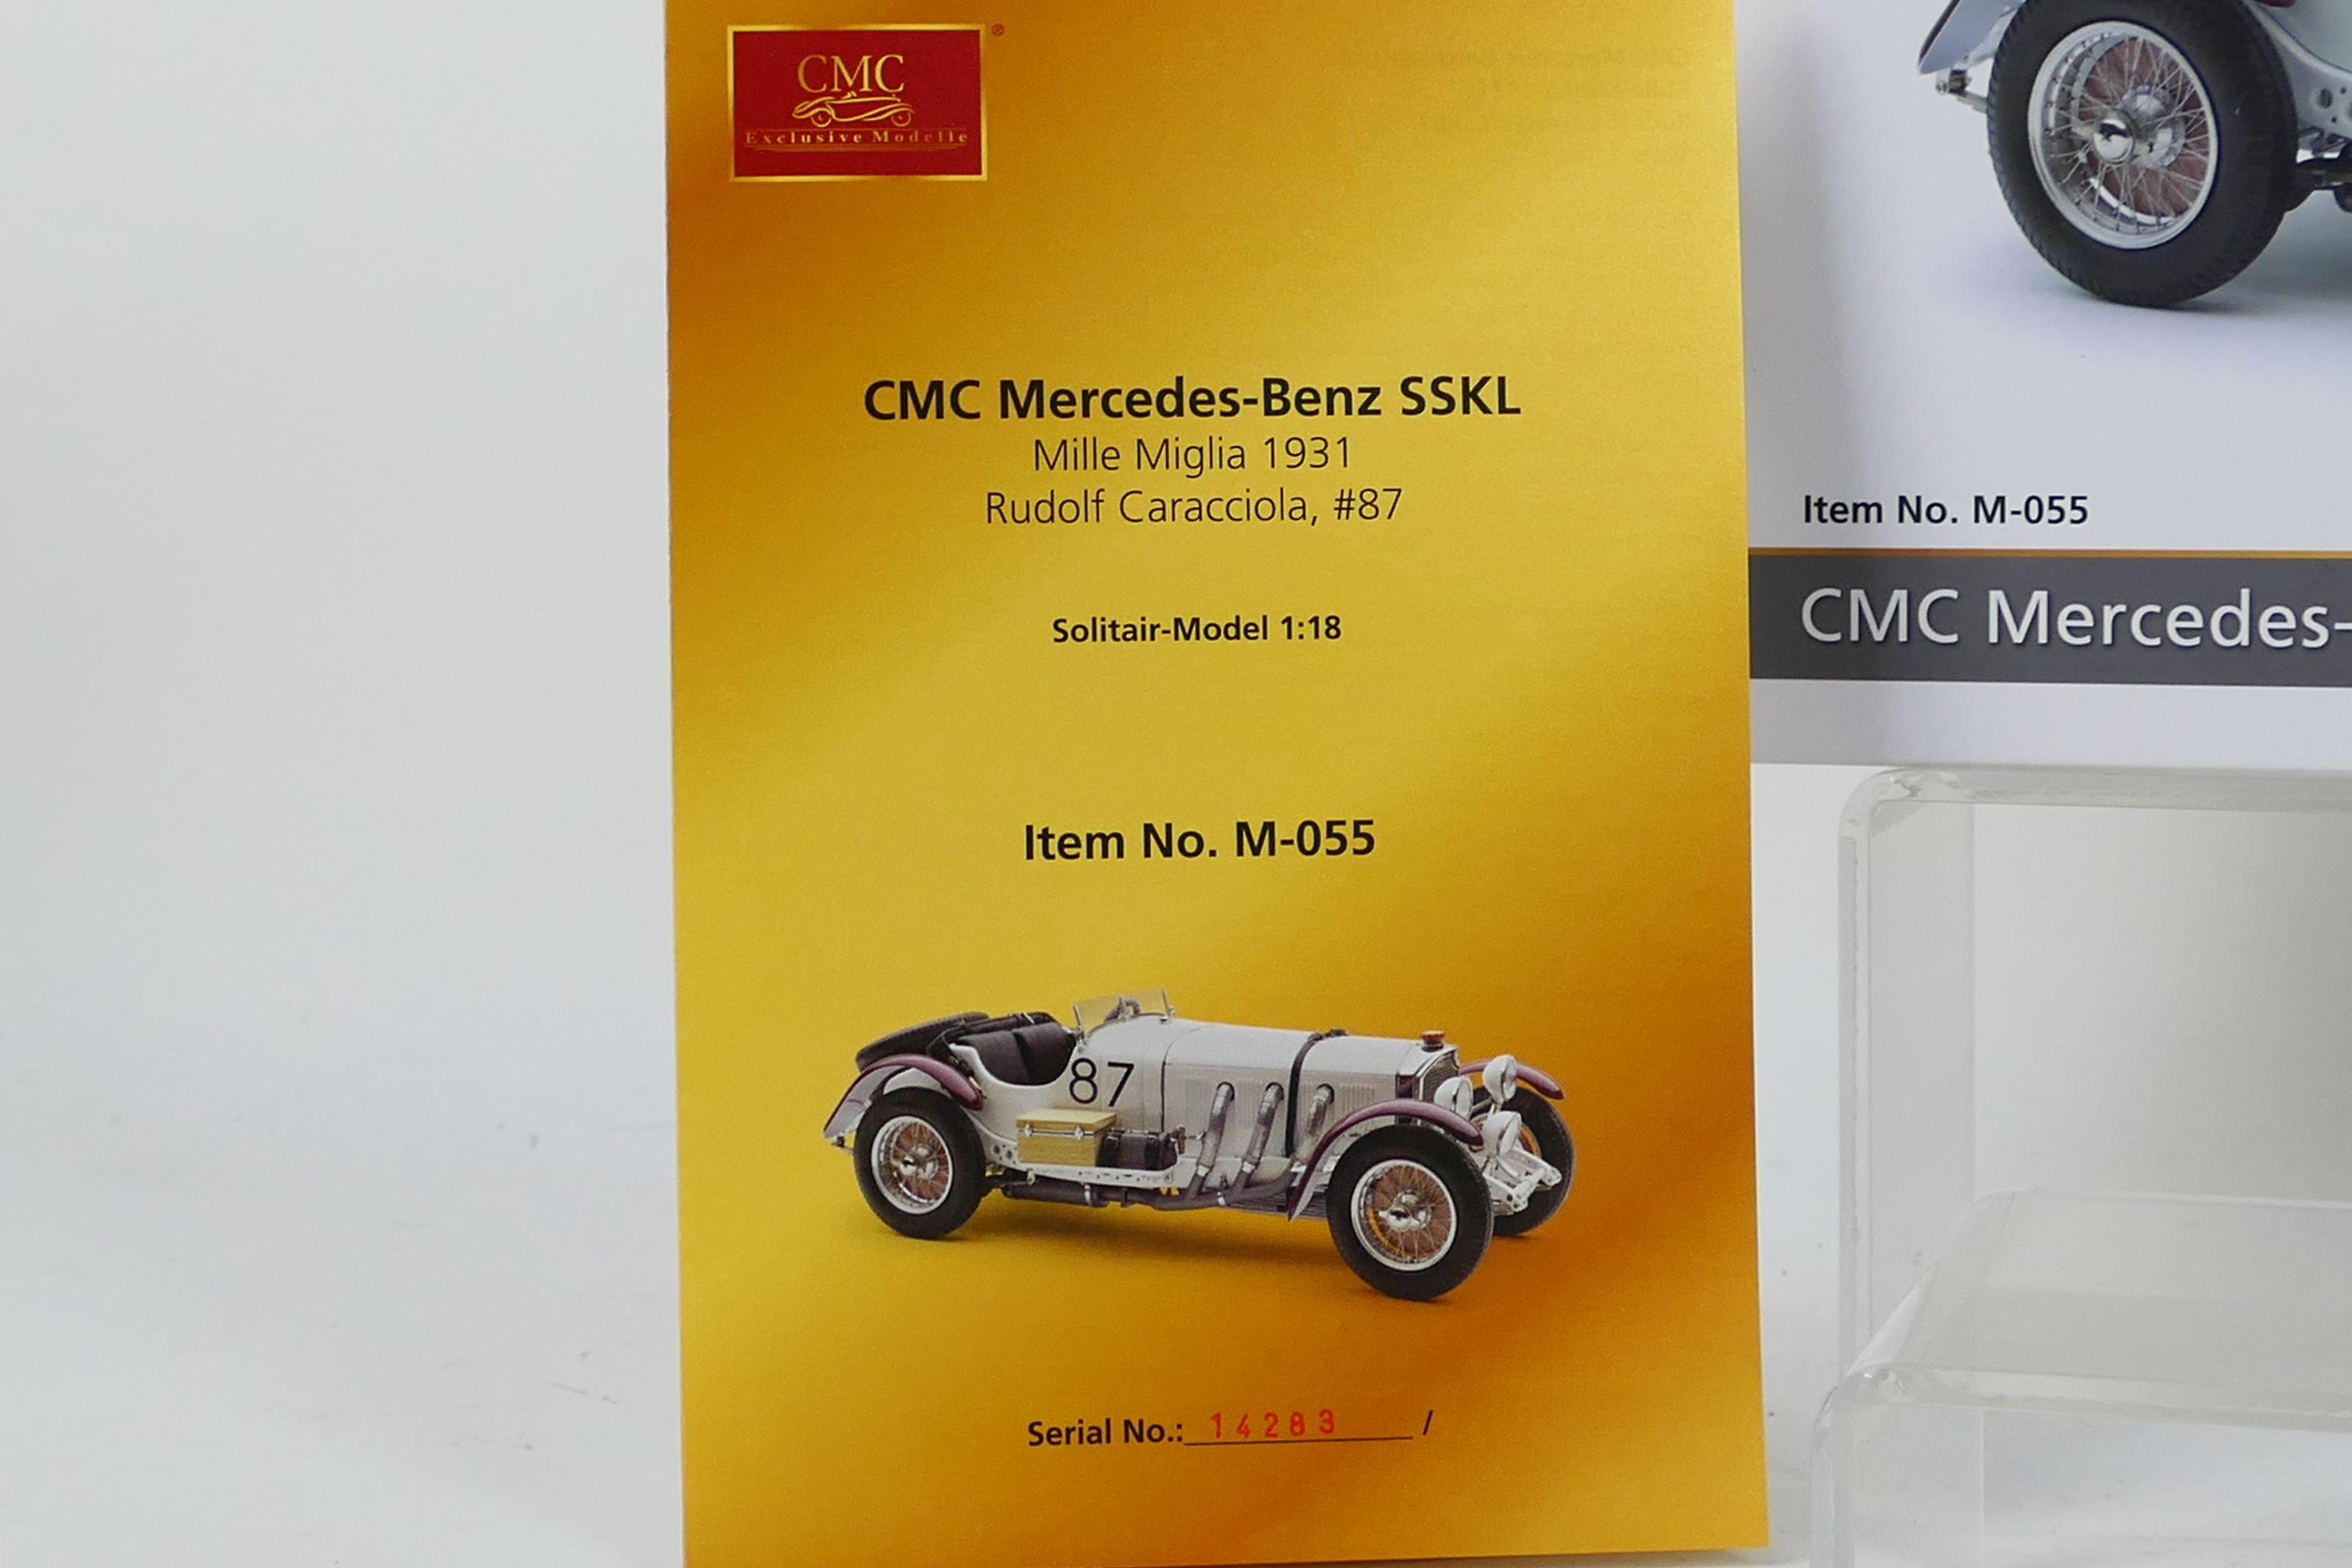 CMC - A boxed limited edition die-cast CMC 1:18 Mercedes-Benz SSKL 1931, Mille Miglia, - Image 8 of 9